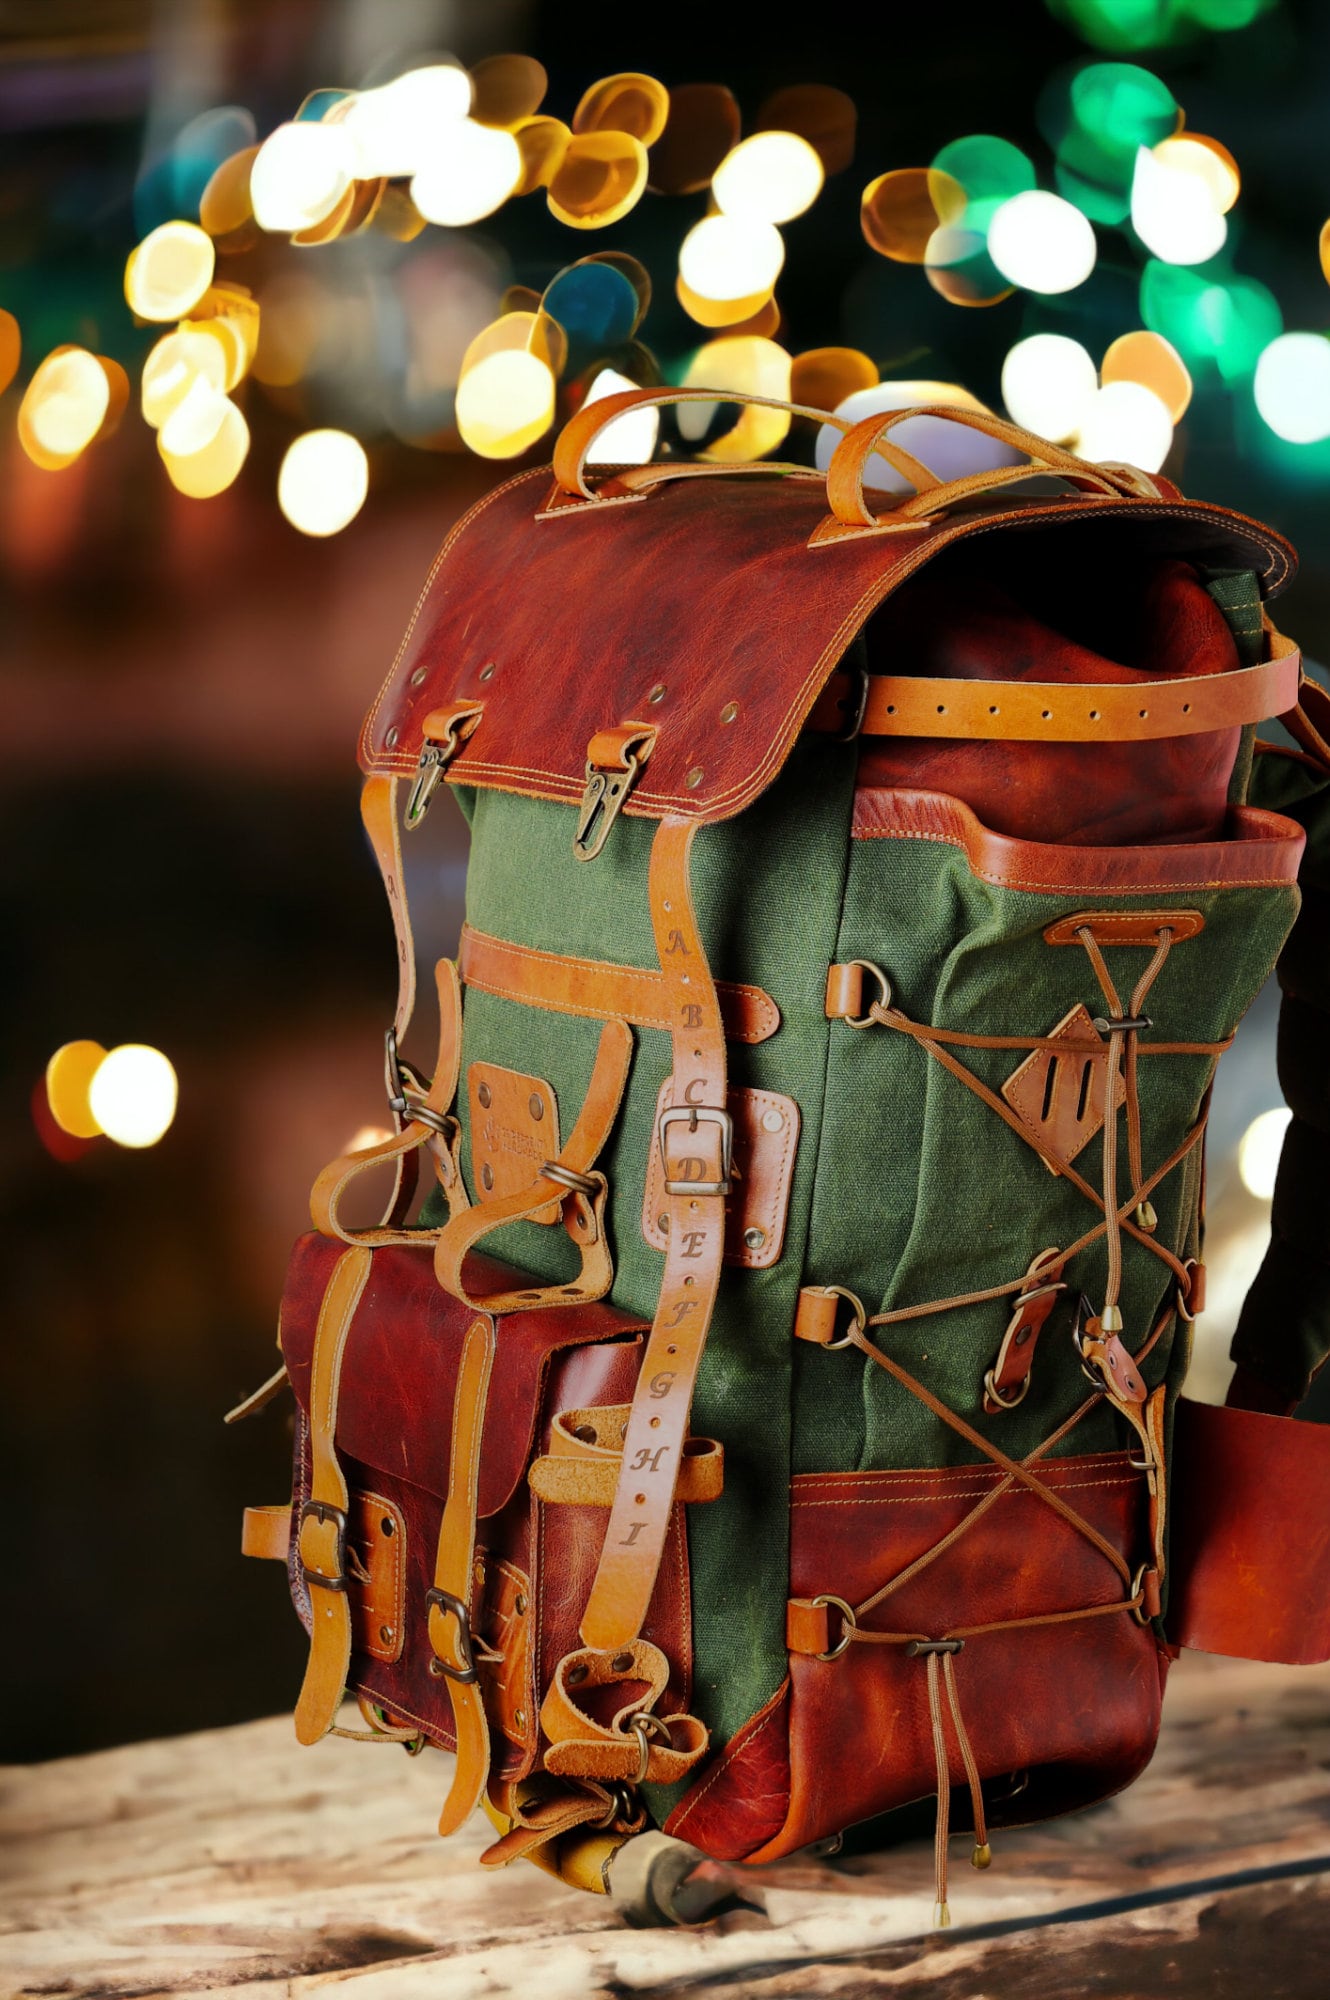 Handmade | Bushcraft Backpack | Leather Canvas Backpack | 50 L  | Daily Use | Bushcraft, Travel, Camping, Hunting, Fishing, Sports bag  99percenthandmade   